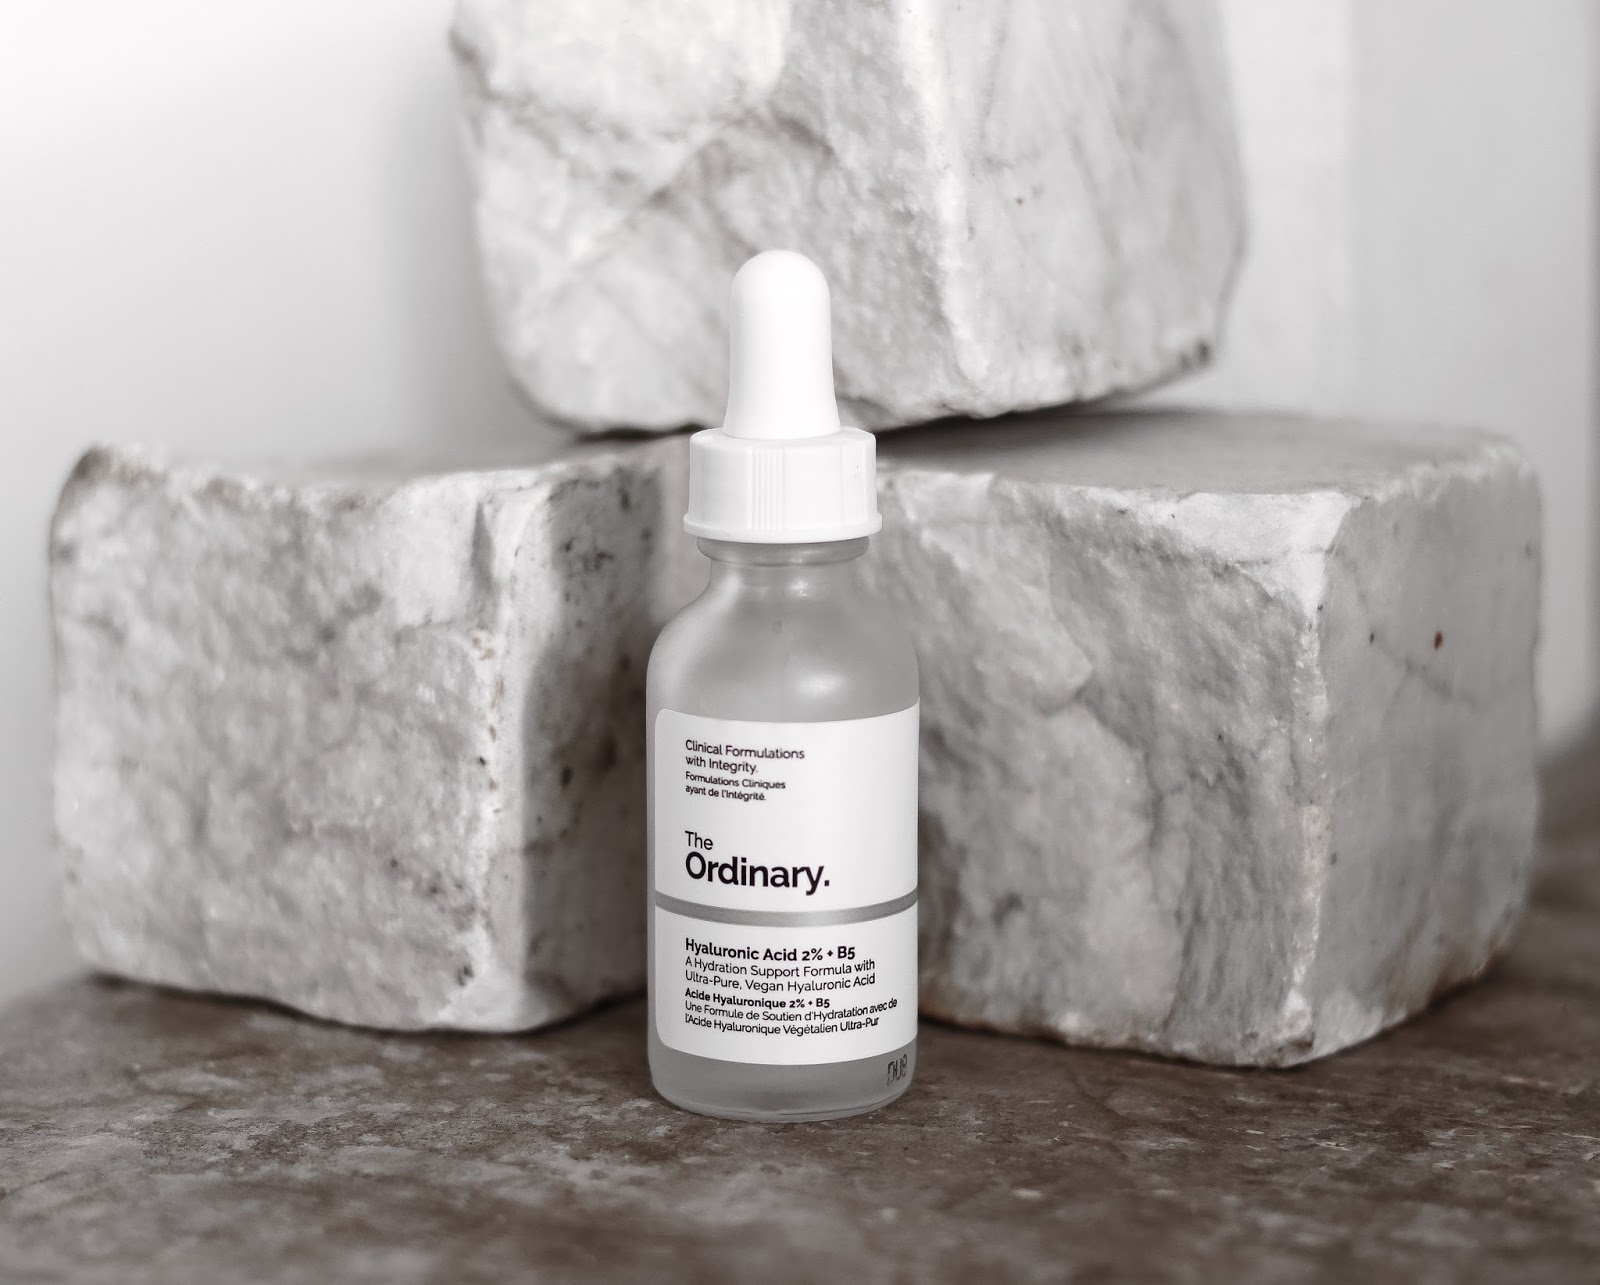 The Ordinary Review Worth The Hype // Beauty by Almost Chic